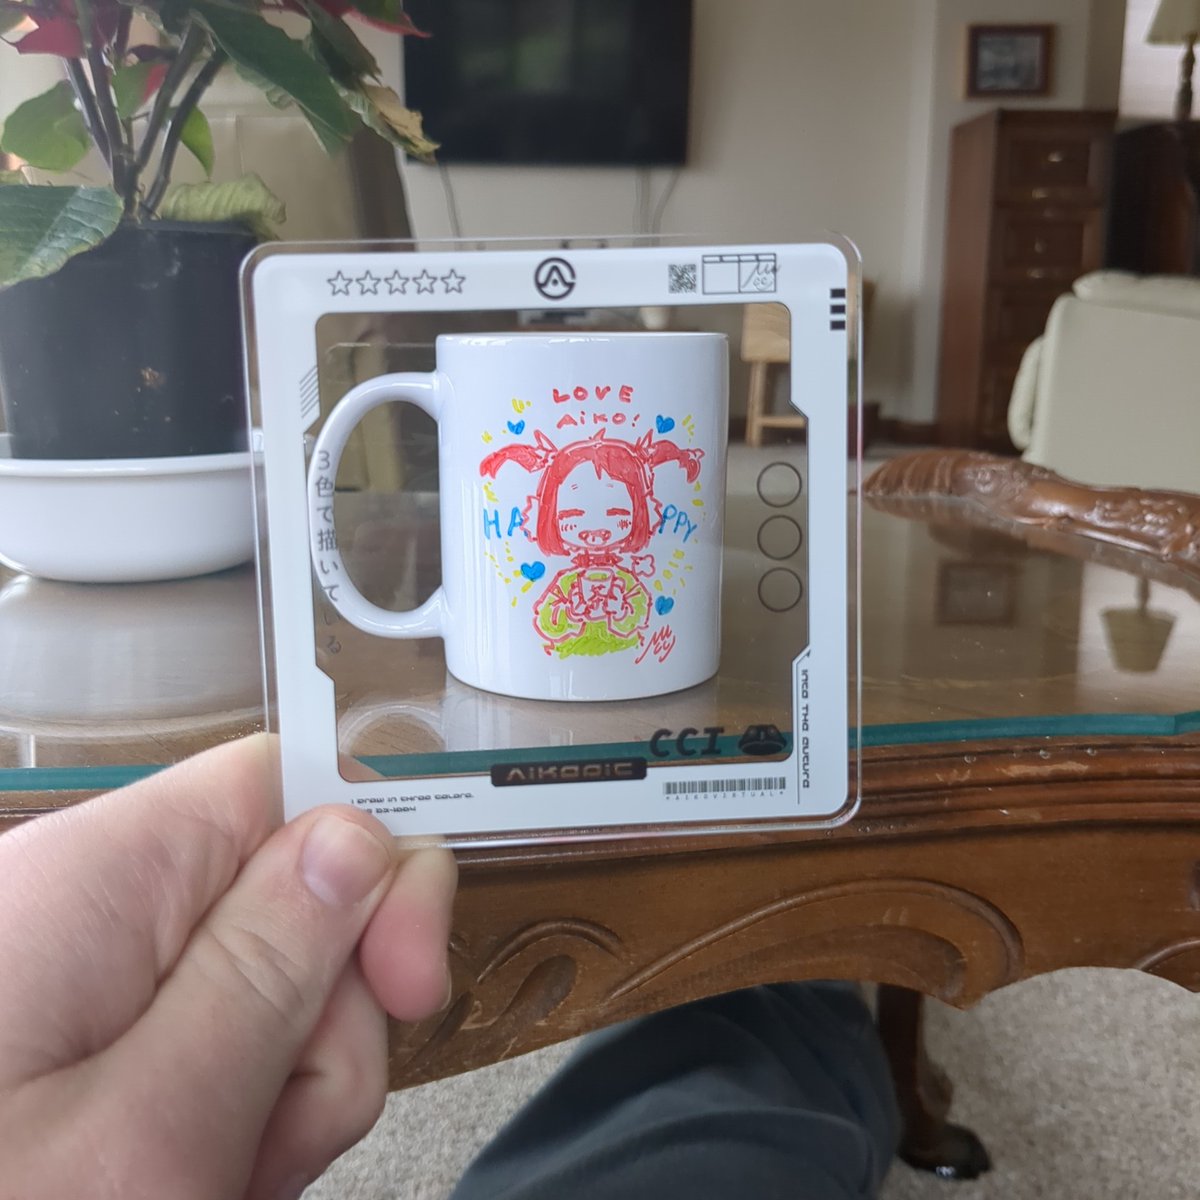 Shoutout @MAcciNFT First time ive ever received physical items for buying an nft. She even spent the time to hand draw my own @aikovirtual on the mug. Macci 🐐